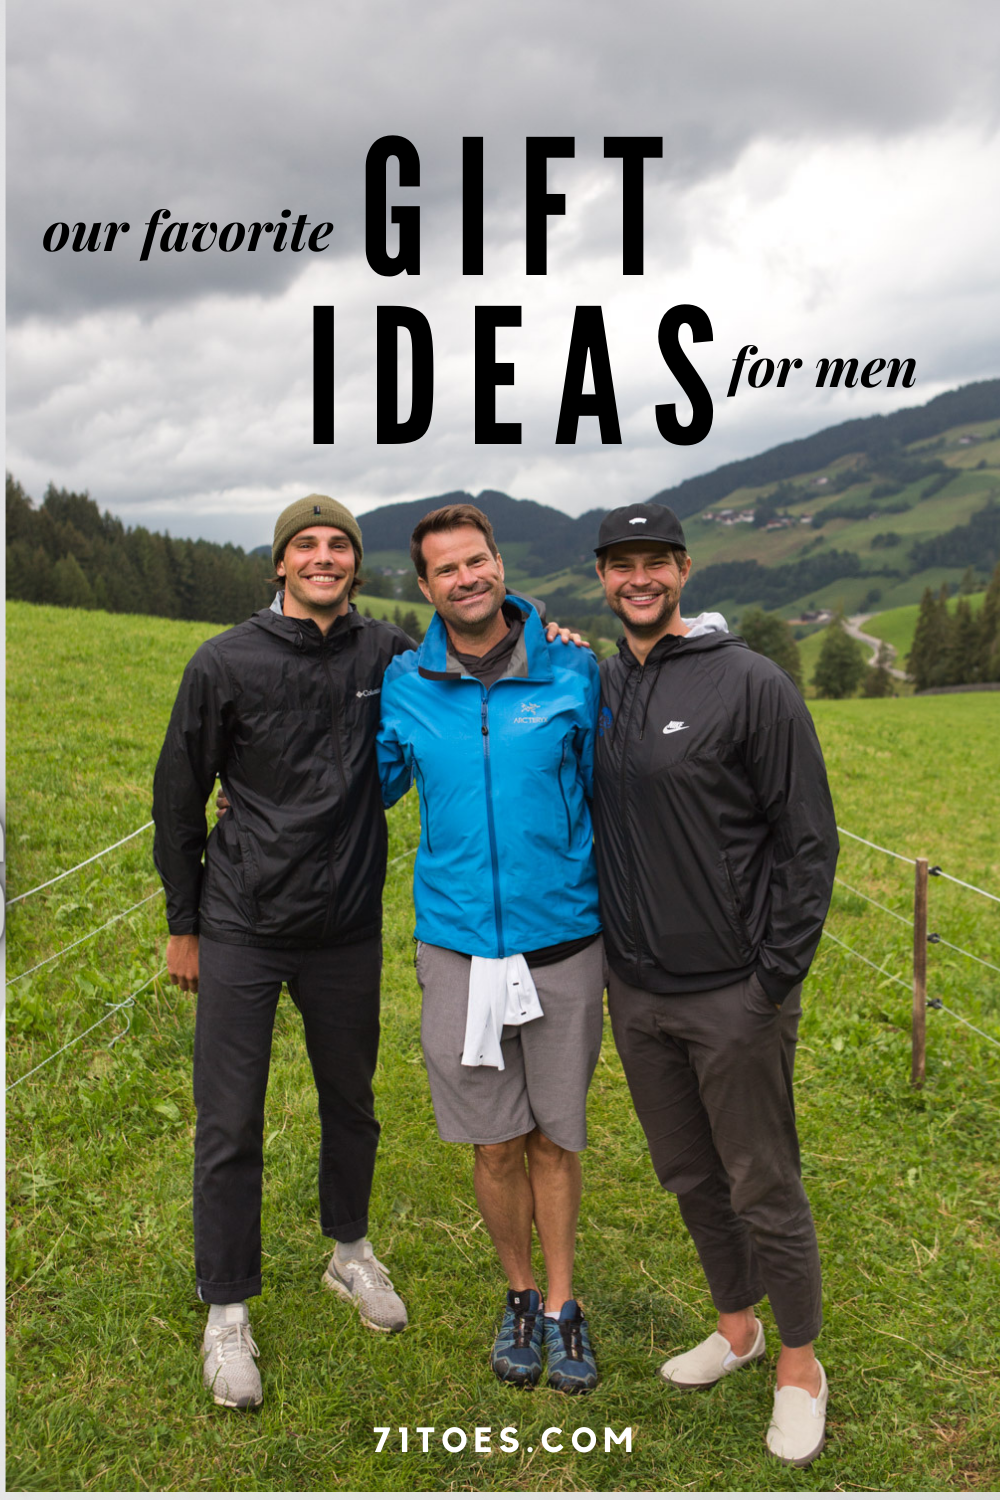 Dave, Carson and Max smiling on this link for Gift ideas for Men